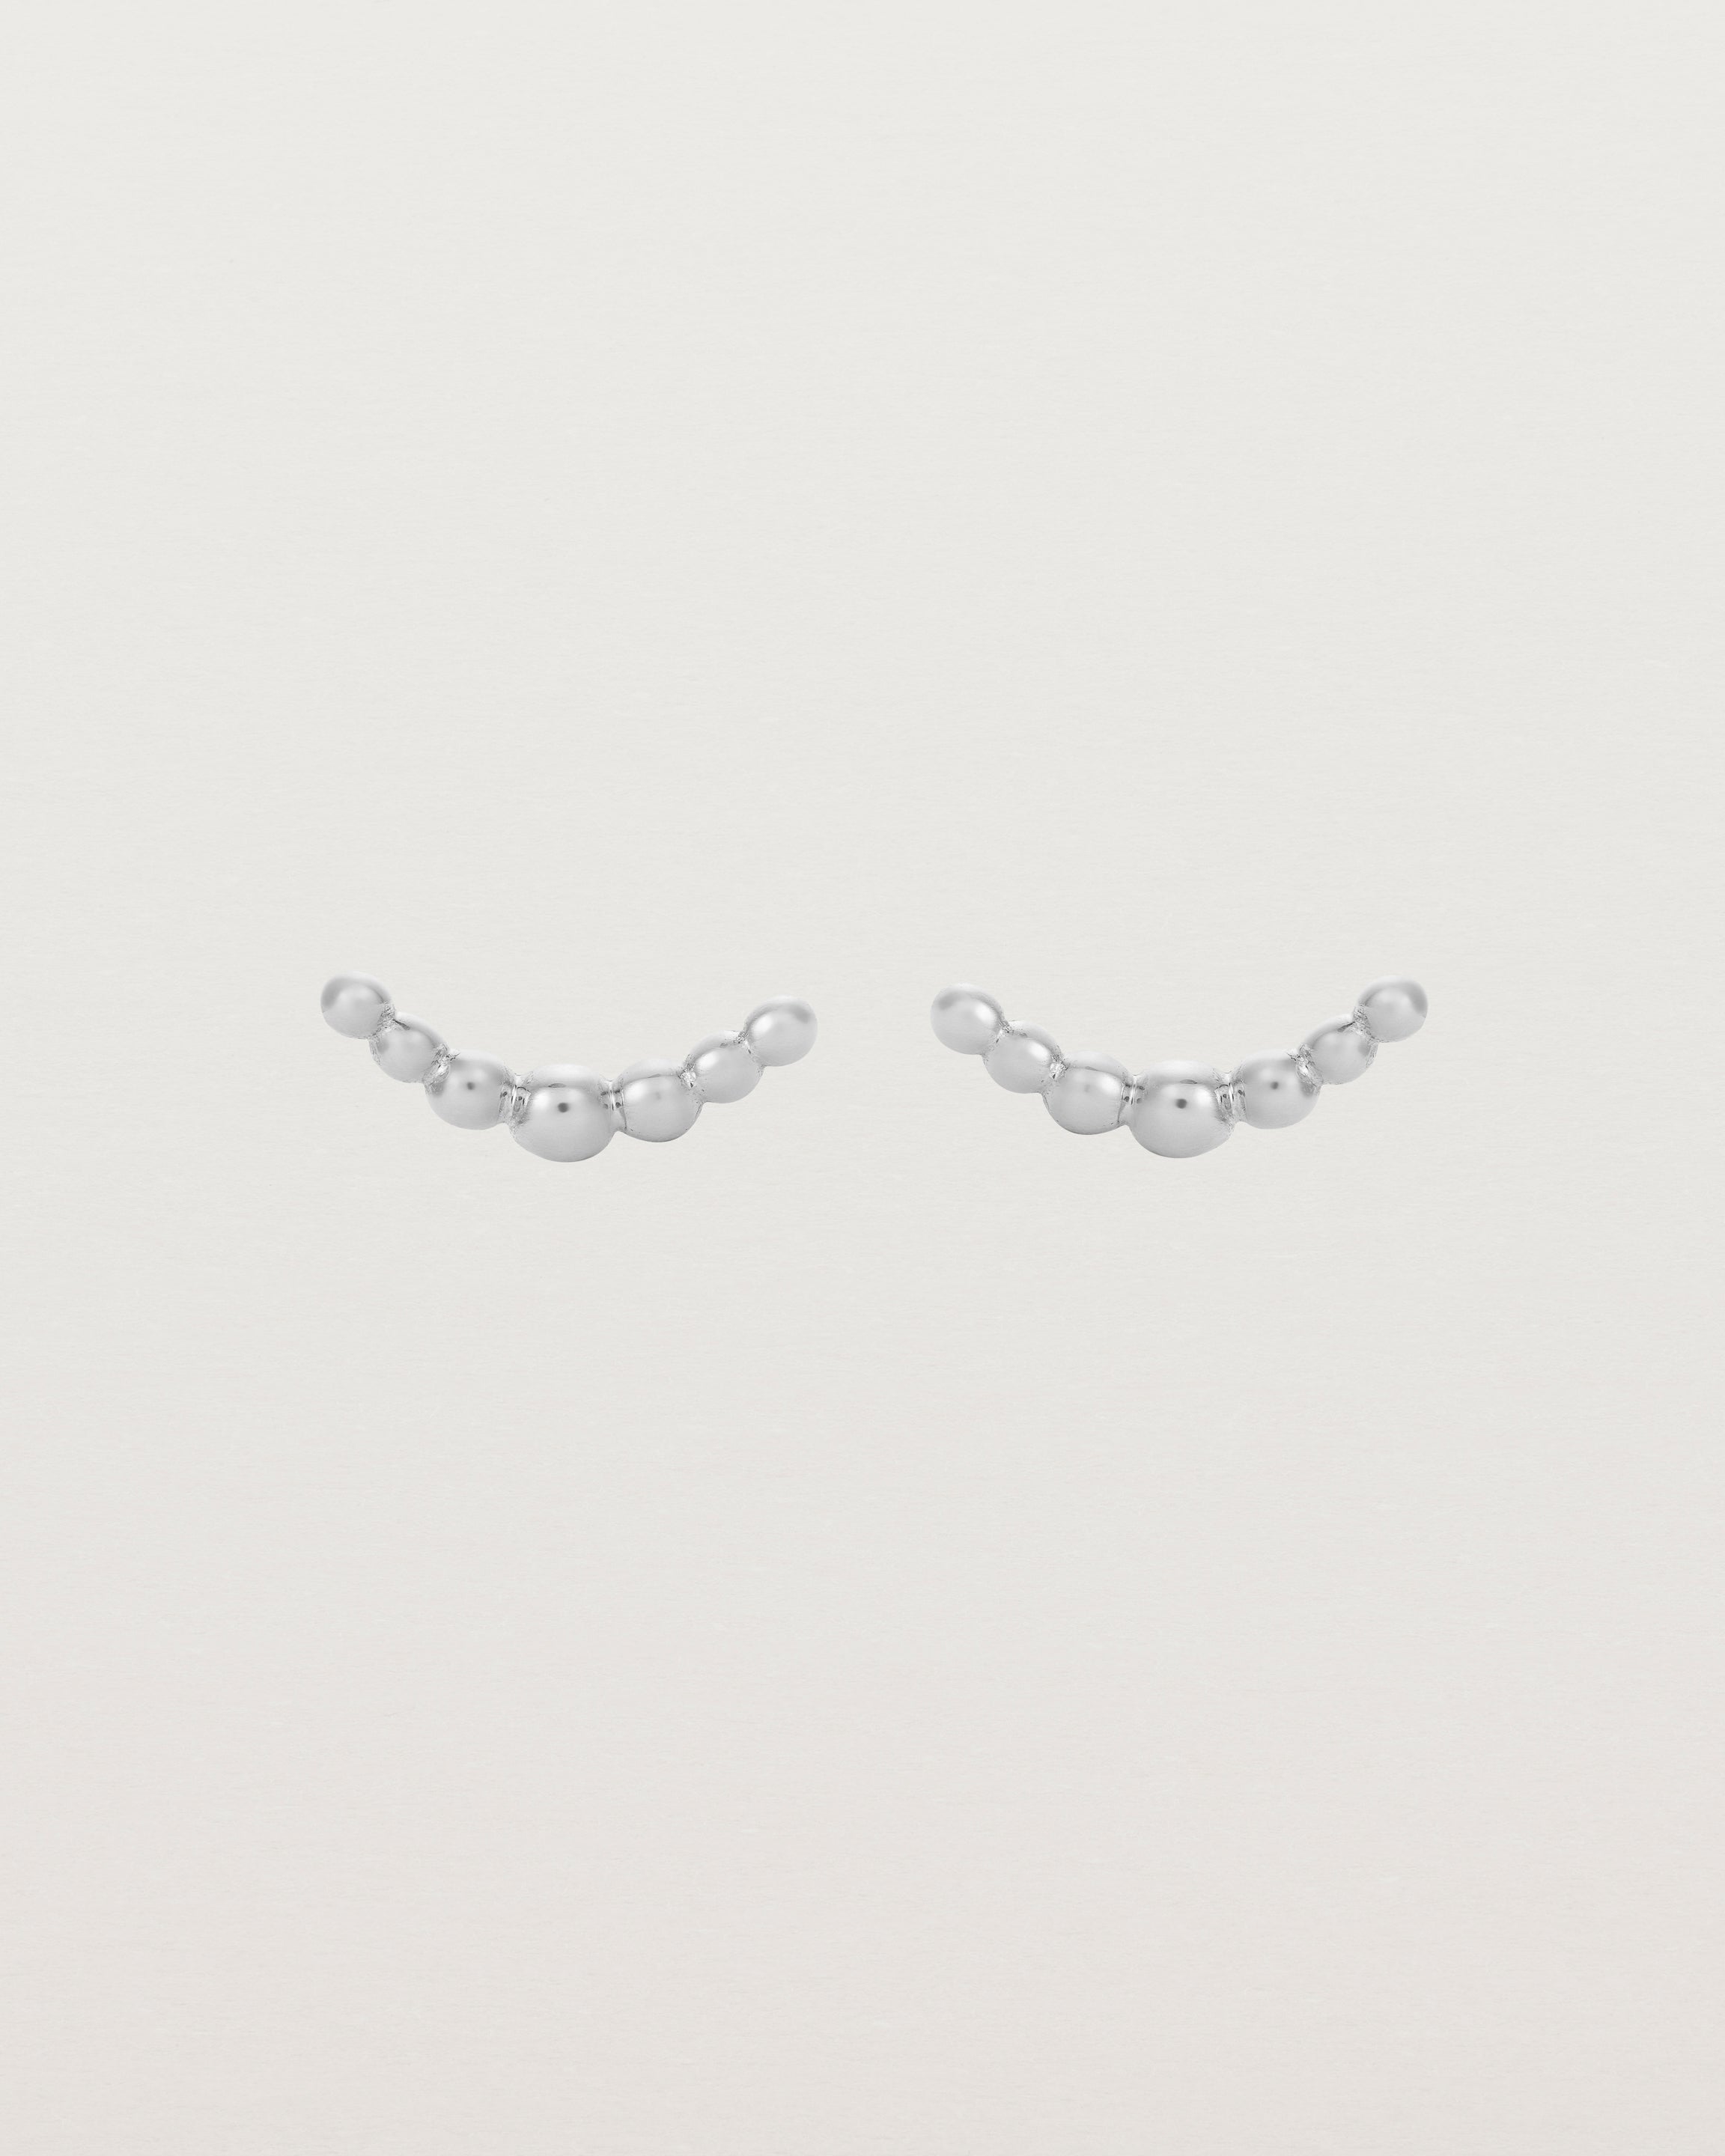 A pair of sterling silver studs featuring an arc of round metal balls